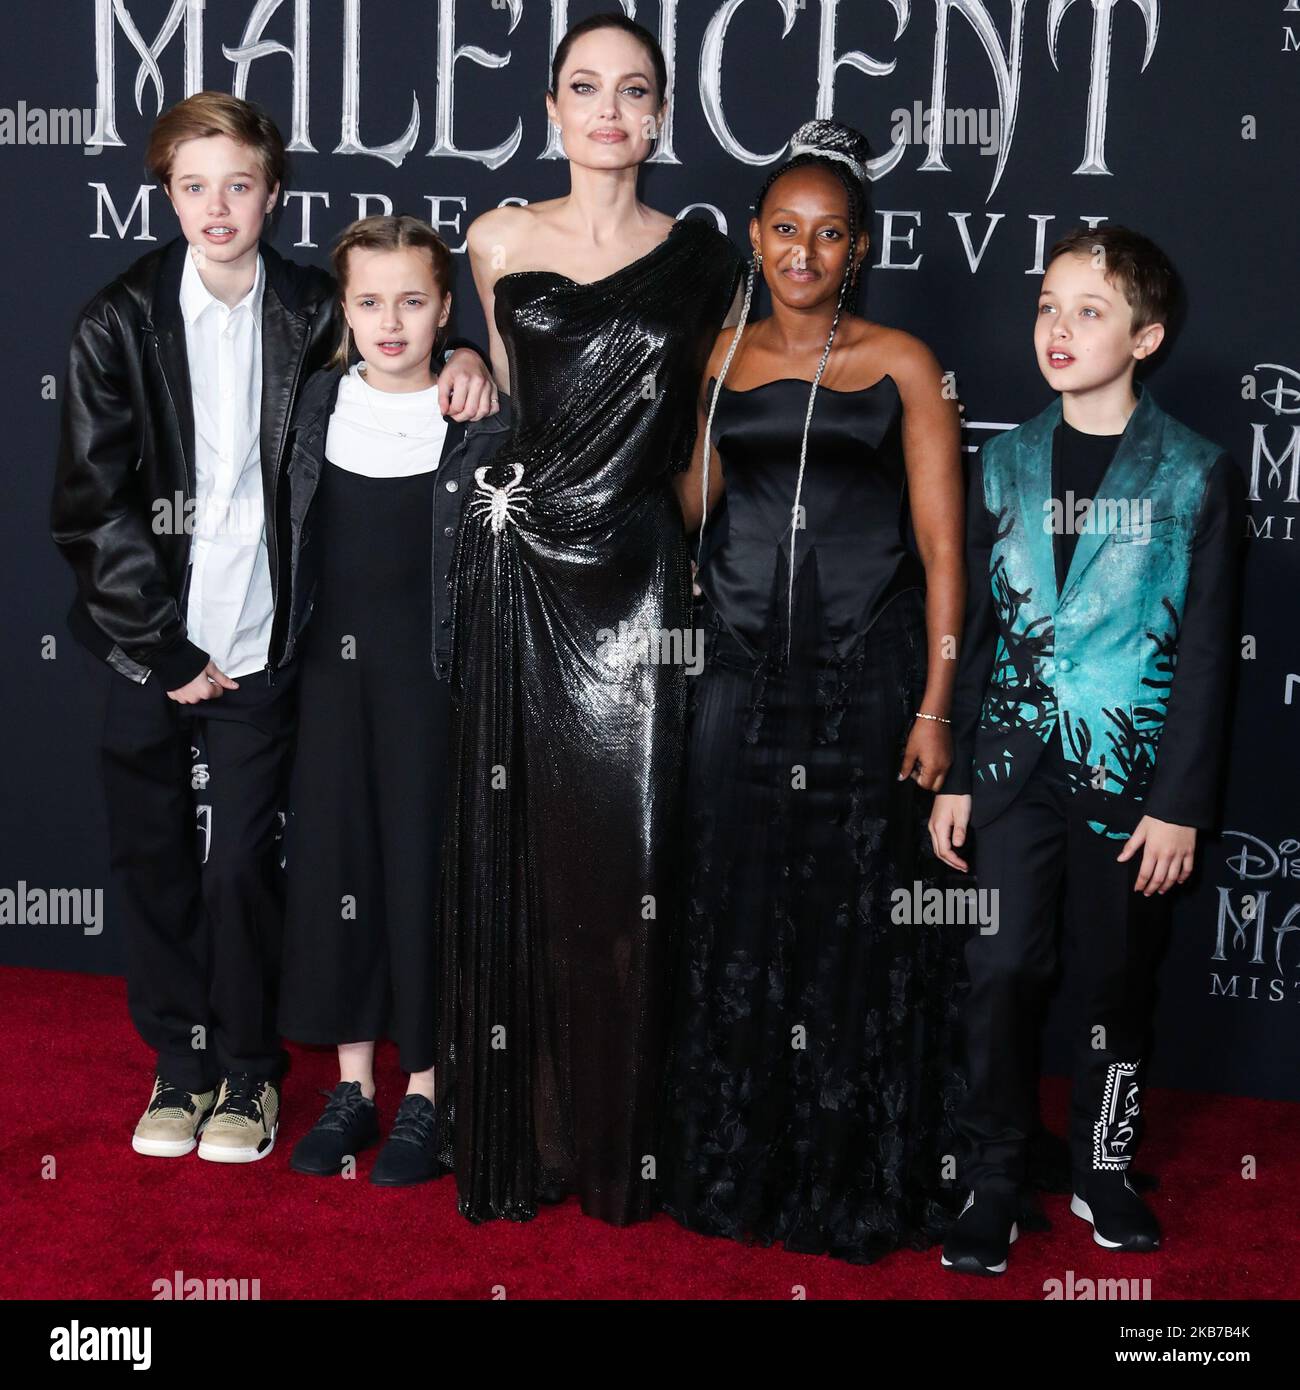 HOLLYWOOD, LOS ANGELES, CALIFORNIA, USA - SEPTEMBER 30: Shiloh Nouvel Jolie-Pitt, Vivienne Marcheline Jolie-Pitt, Angelina Jolie, Zahara Marley Jolie-Pitt and Knox Leon Jolie-Pitt arrive at the World Premiere Of Disney's 'Maleficent: Mistress Of Evil' held at the El Capitan Theatre on September 30, 2019 in Hollywood, Los Angeles, California, United States. (Photo by Xavier Collin/Image Press Agency/NurPhoto) Stock Photo